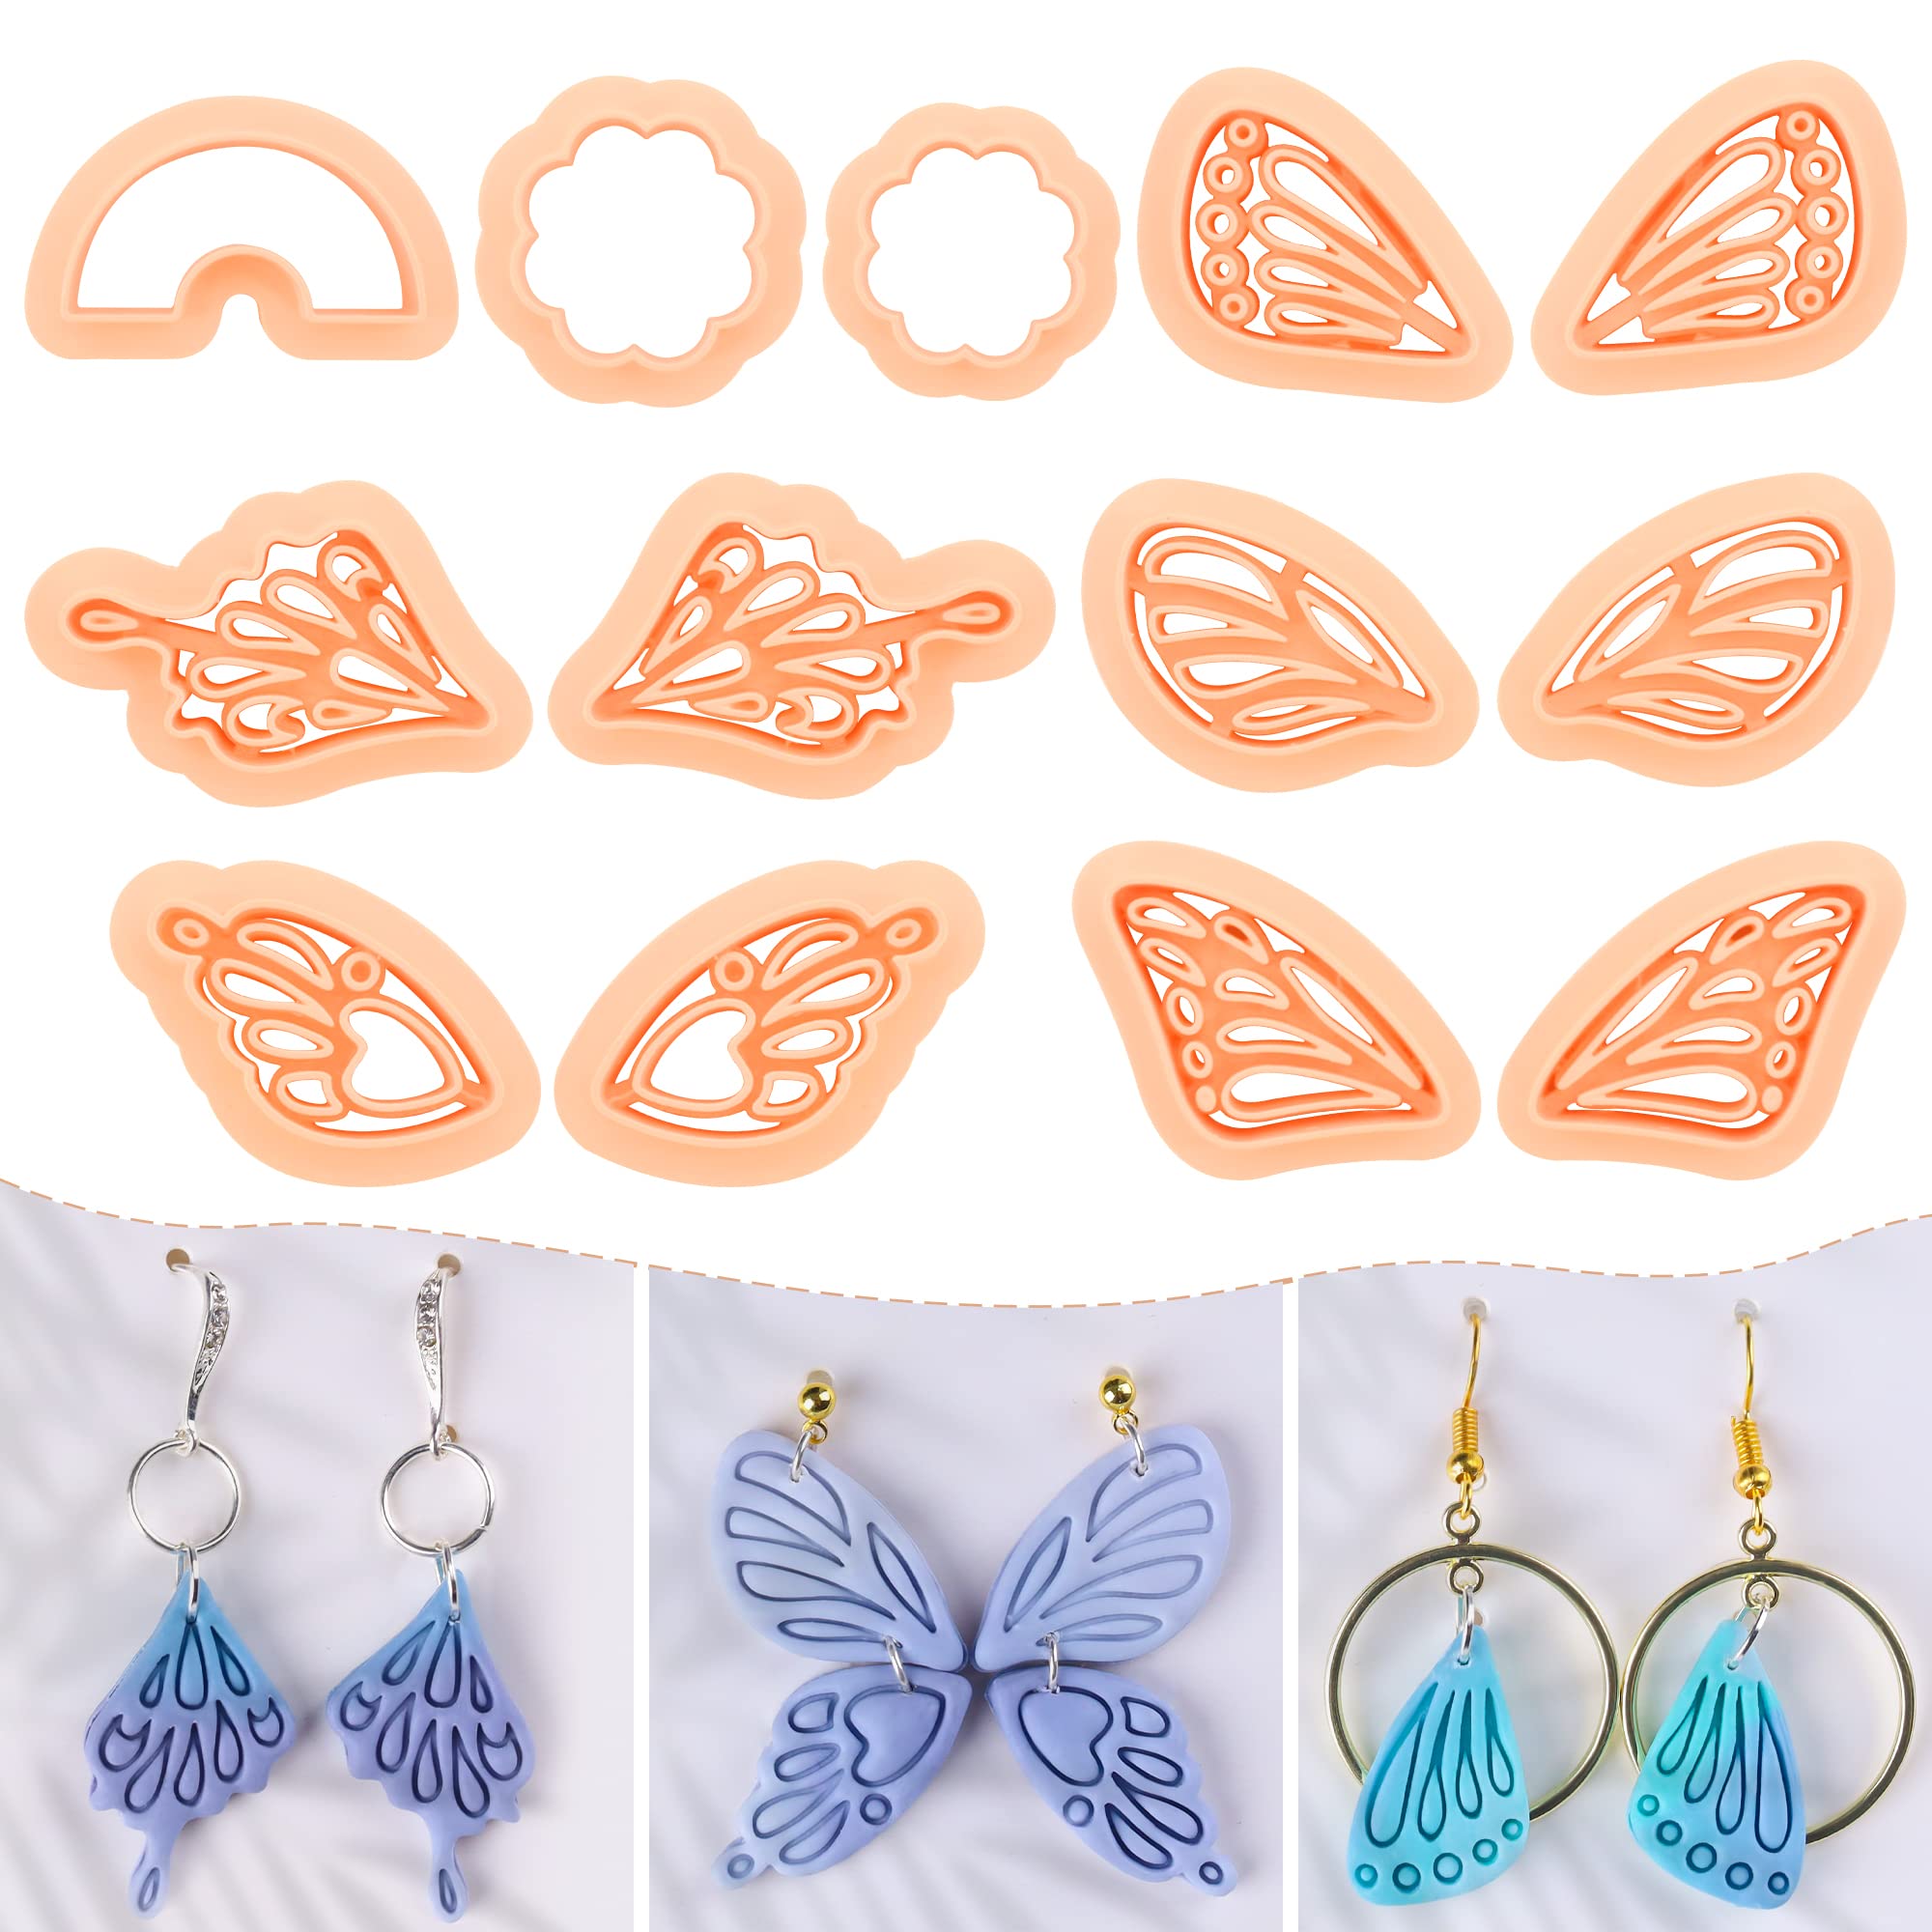 Polymer Clay Cutters Set - 21pcs Earring Cutters Kit With Premium